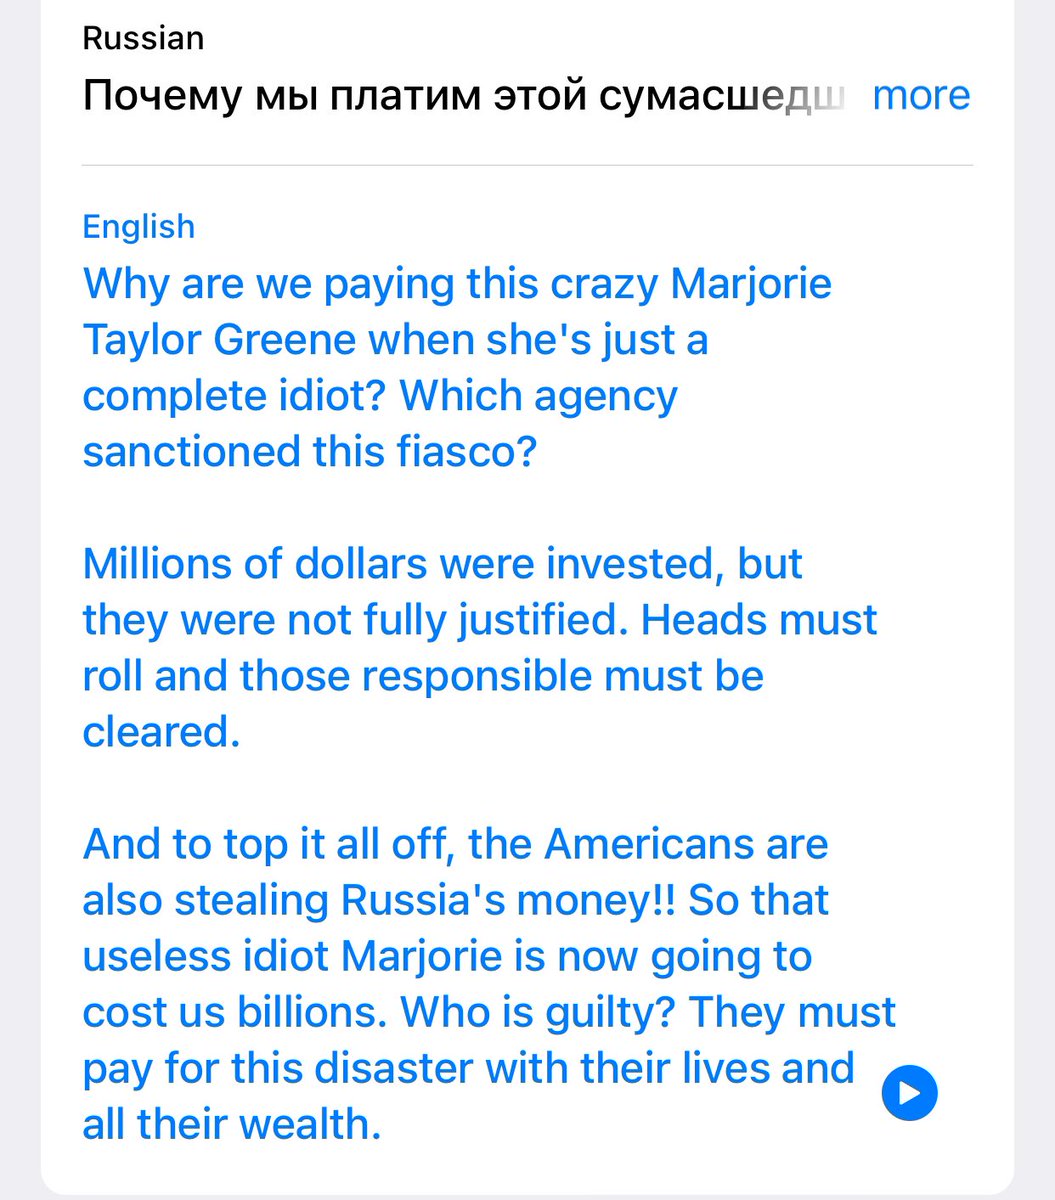 @RepMTG Marjorie, on Russian Telegram they’re calling you a “useless idiot”.